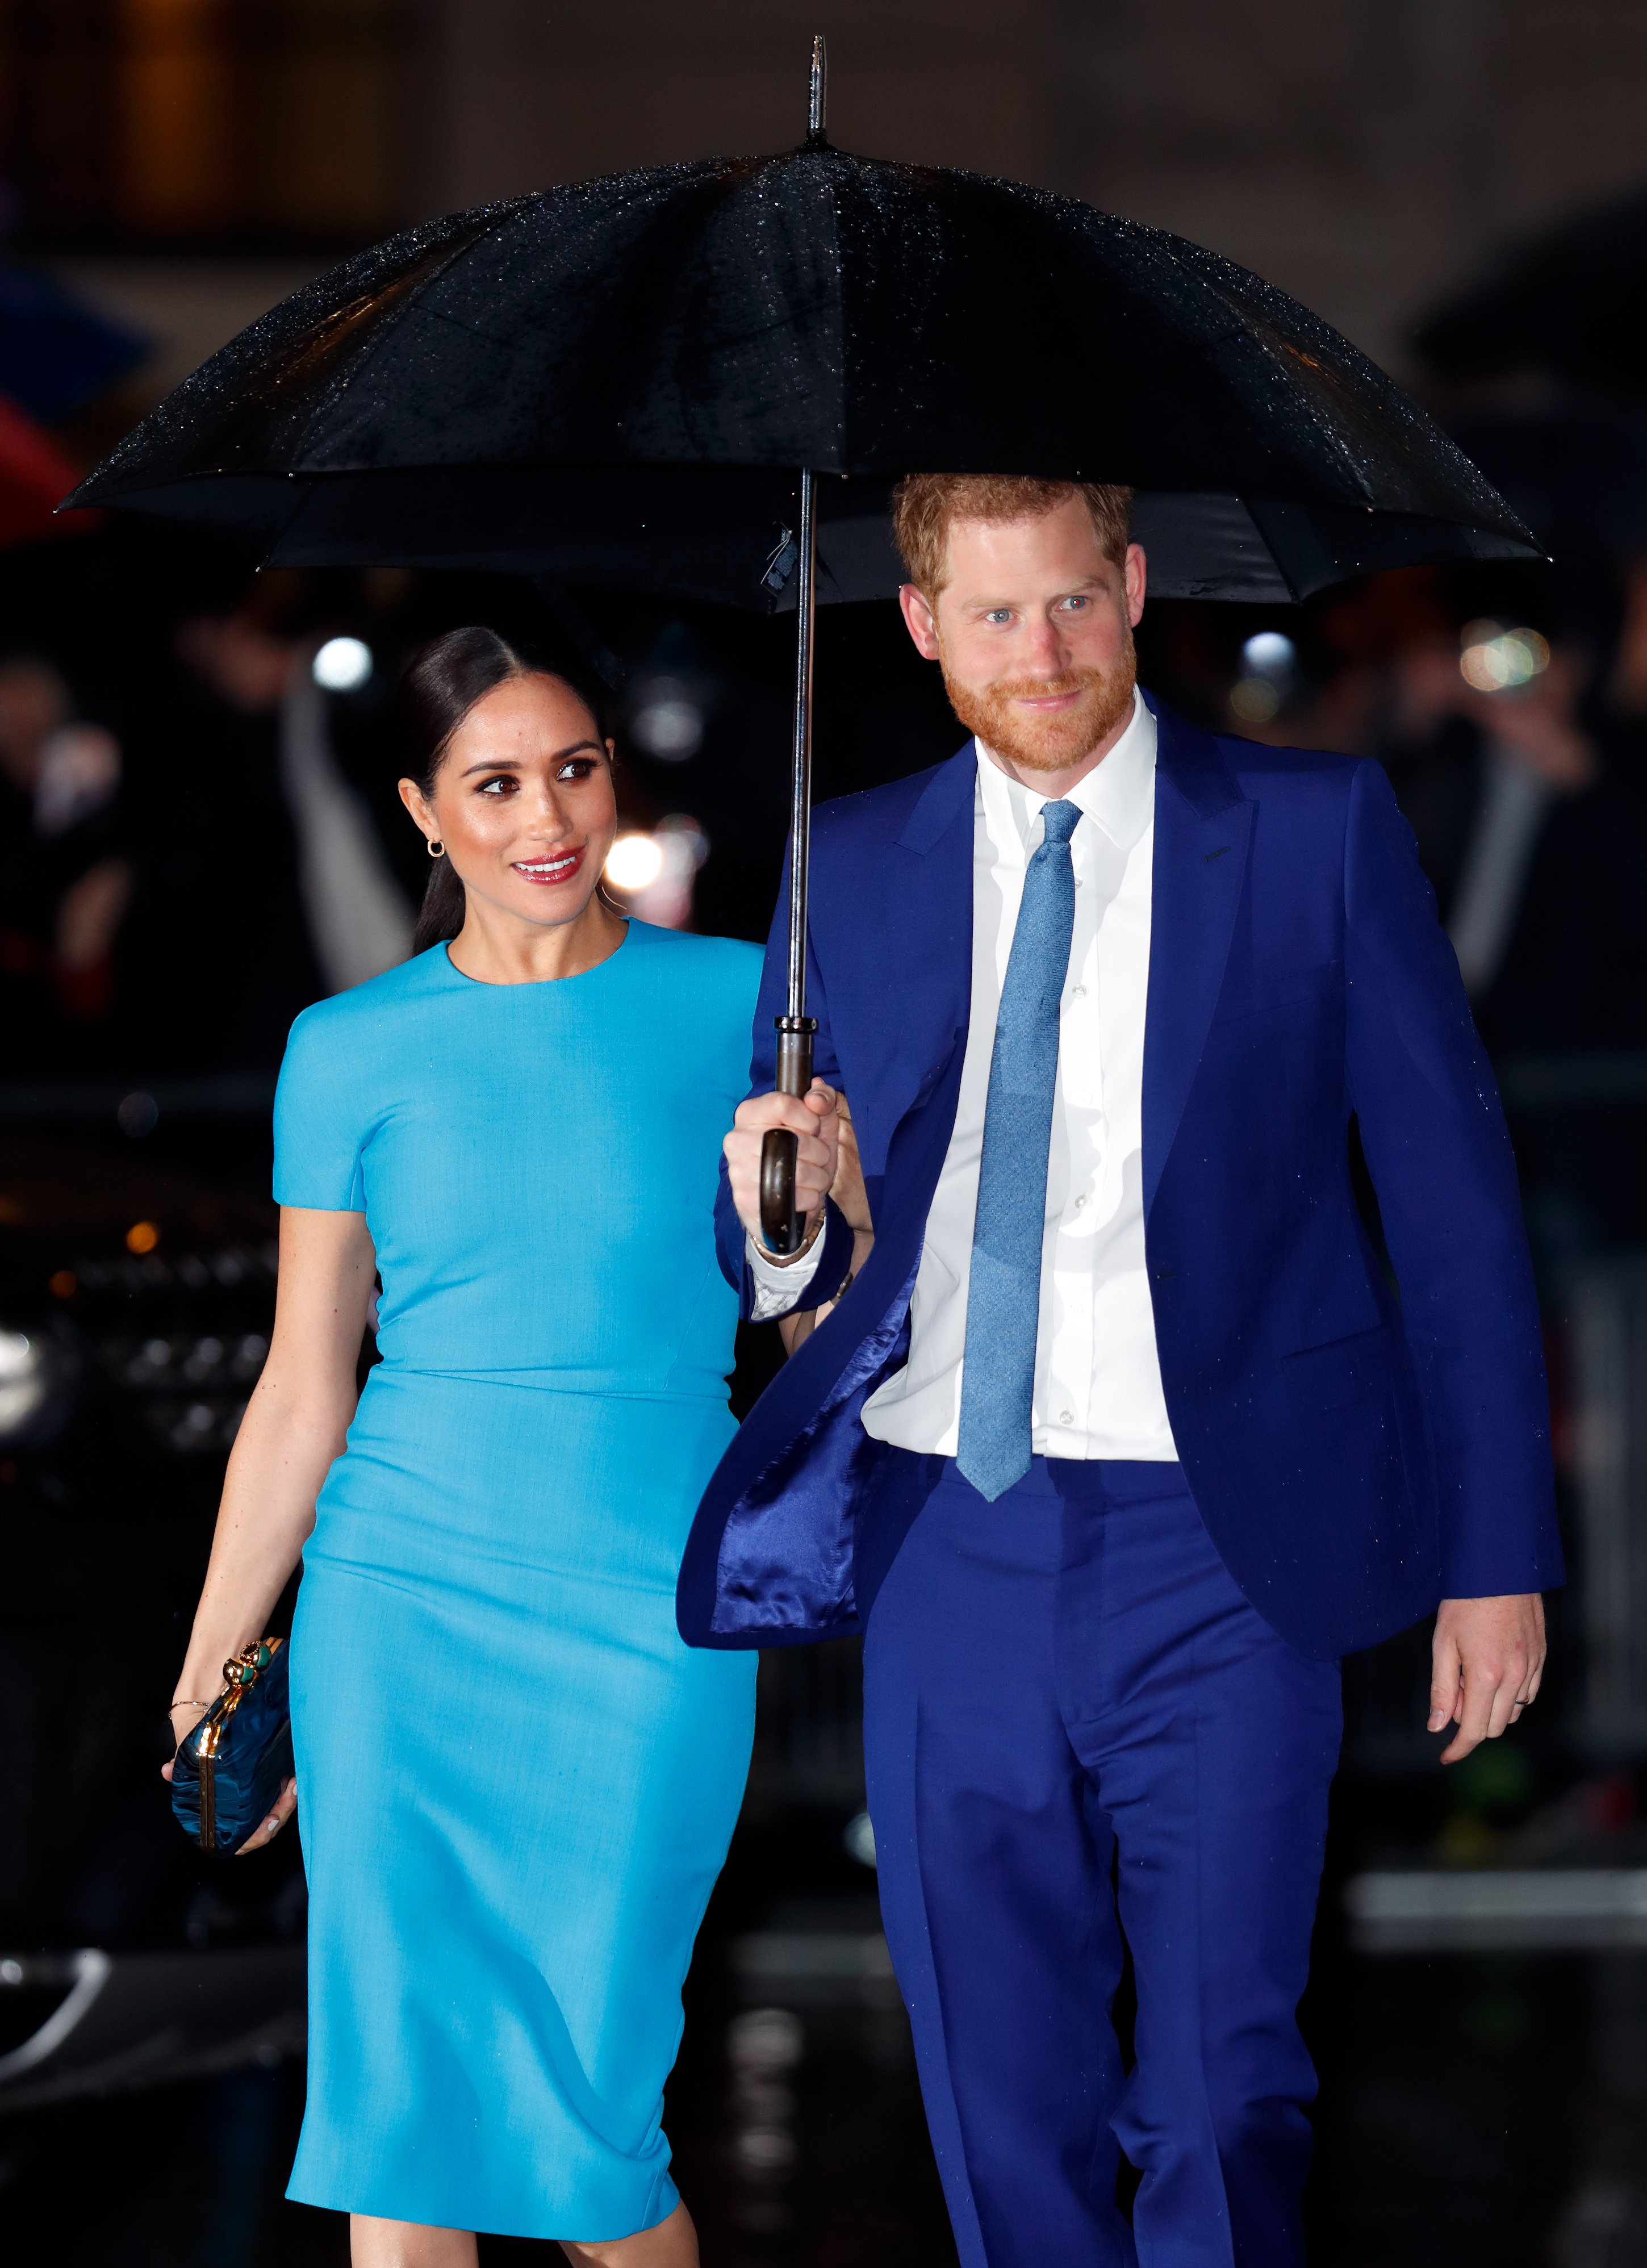 Meghan Markle and Prince Harry attend The Endeavour Fund Awards on March 5, 2020, in London, England. | Source: Getty Images.